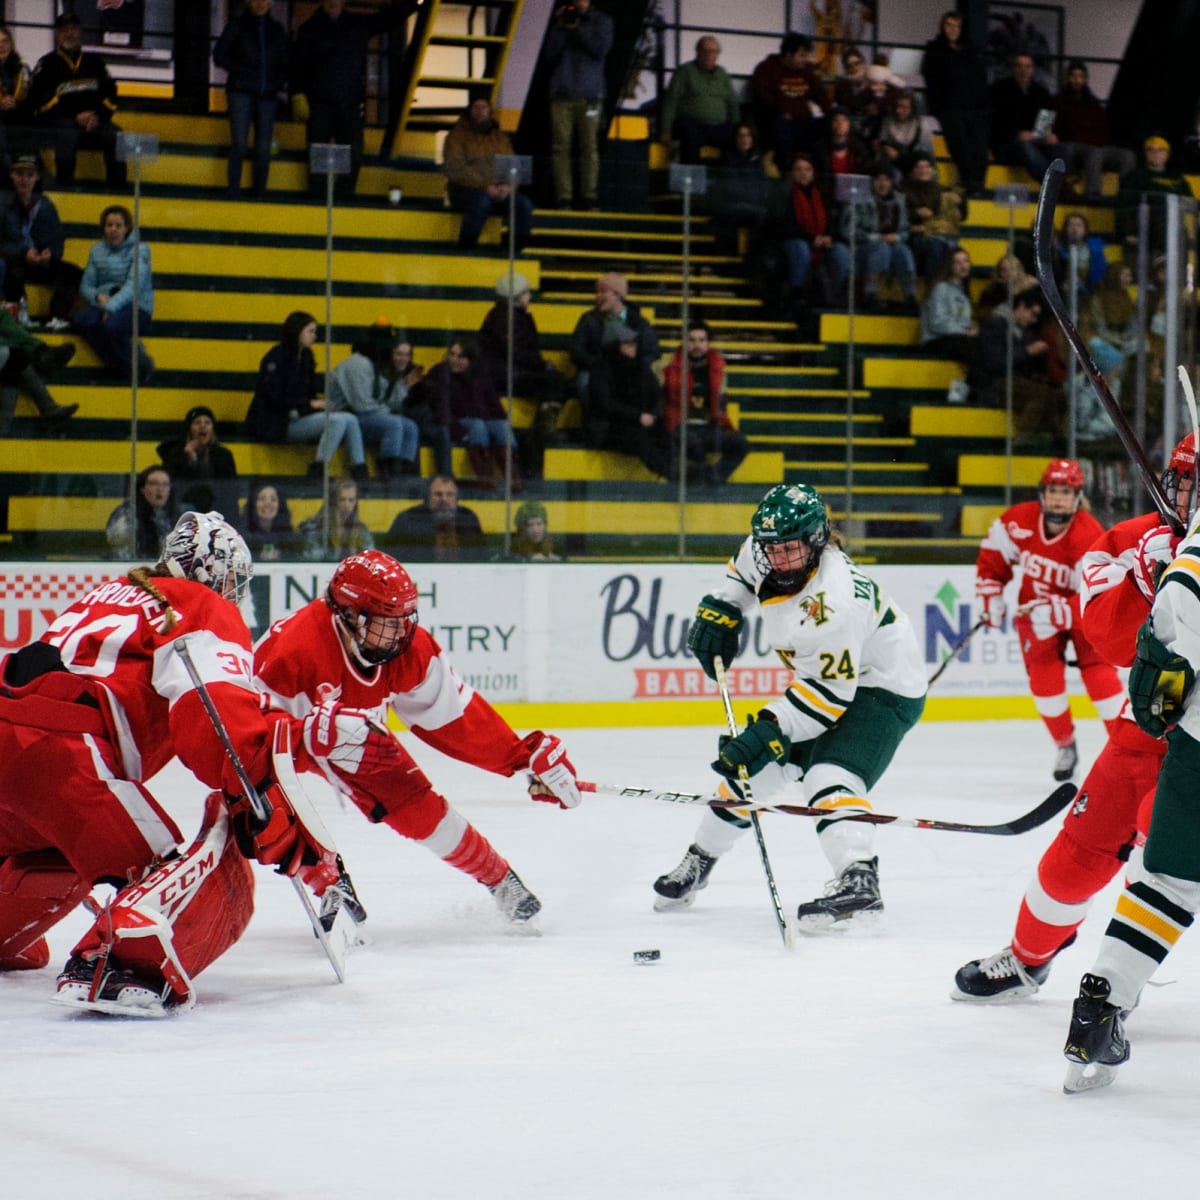 Watch Boston University, Providence Stream womens college hockey live - How to Watch and Stream Major League and College Sports